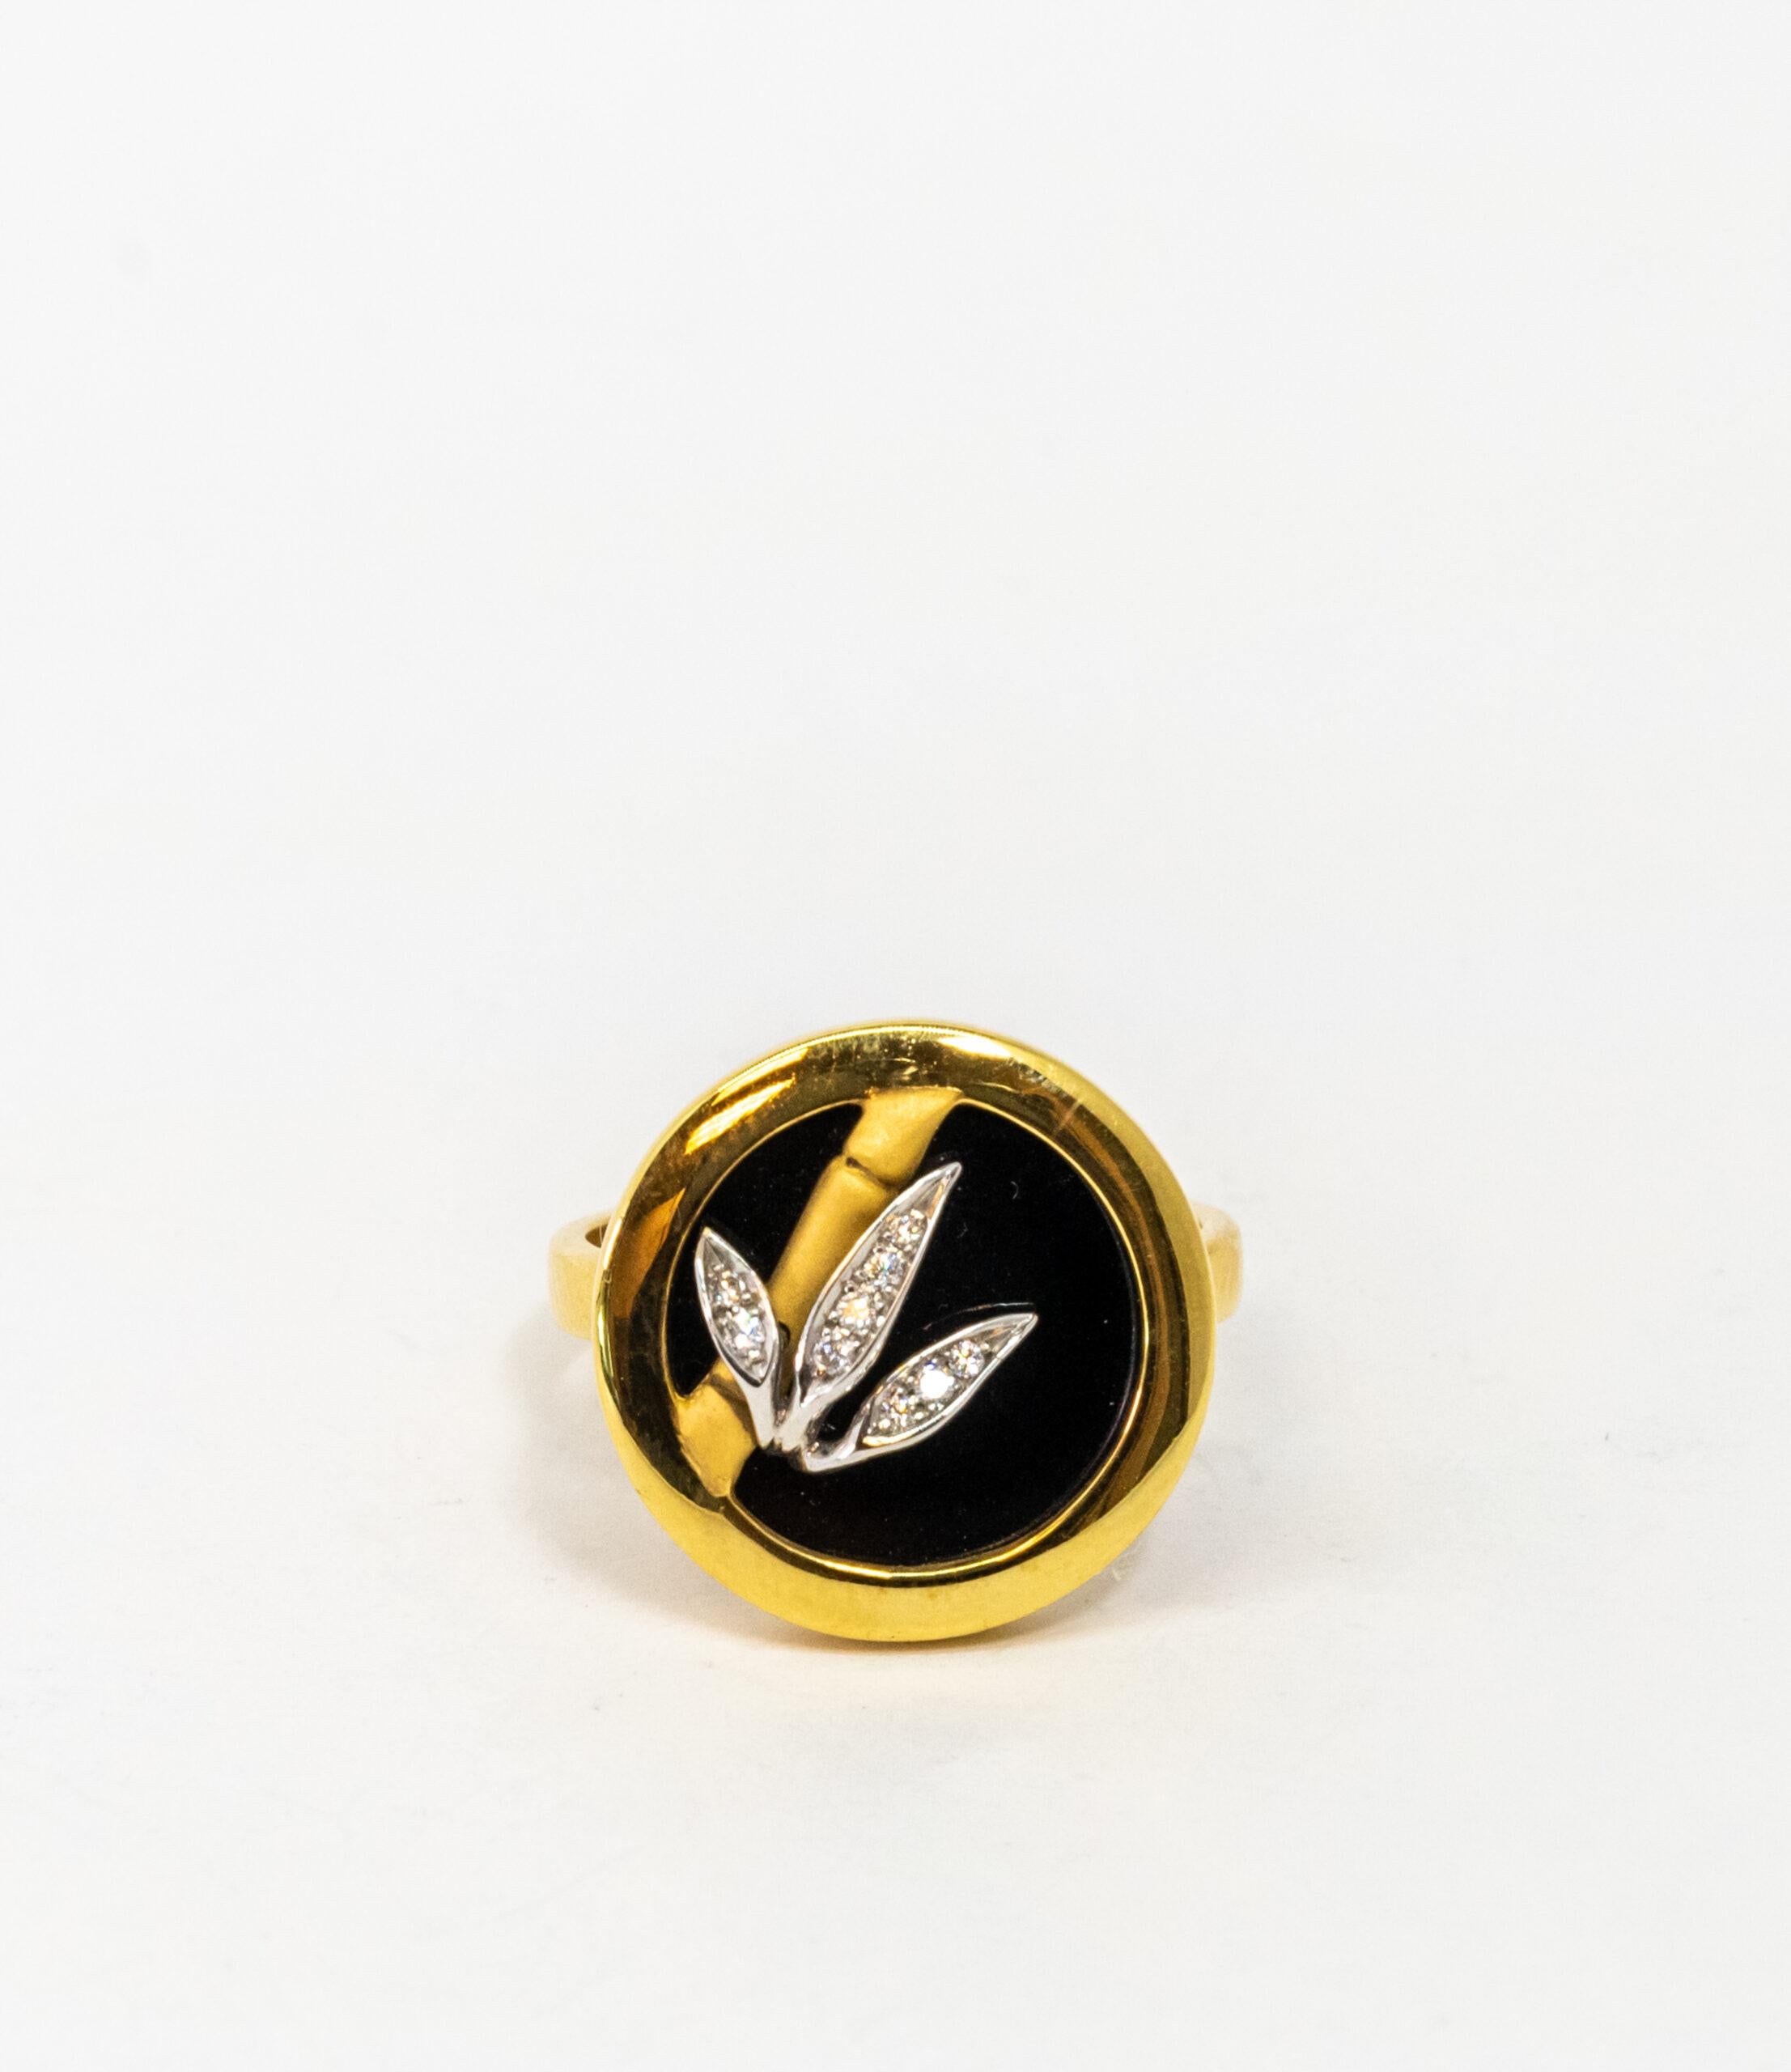 This ring is made of 18K Yellow Gold. It is decorated with black Onyx base and 18K Yellow gold bamboo stick with leaves. 18K White Gold leave patterns set with 9 Diamonds (~0.06 ct)

Size – 54.5 (7 US)